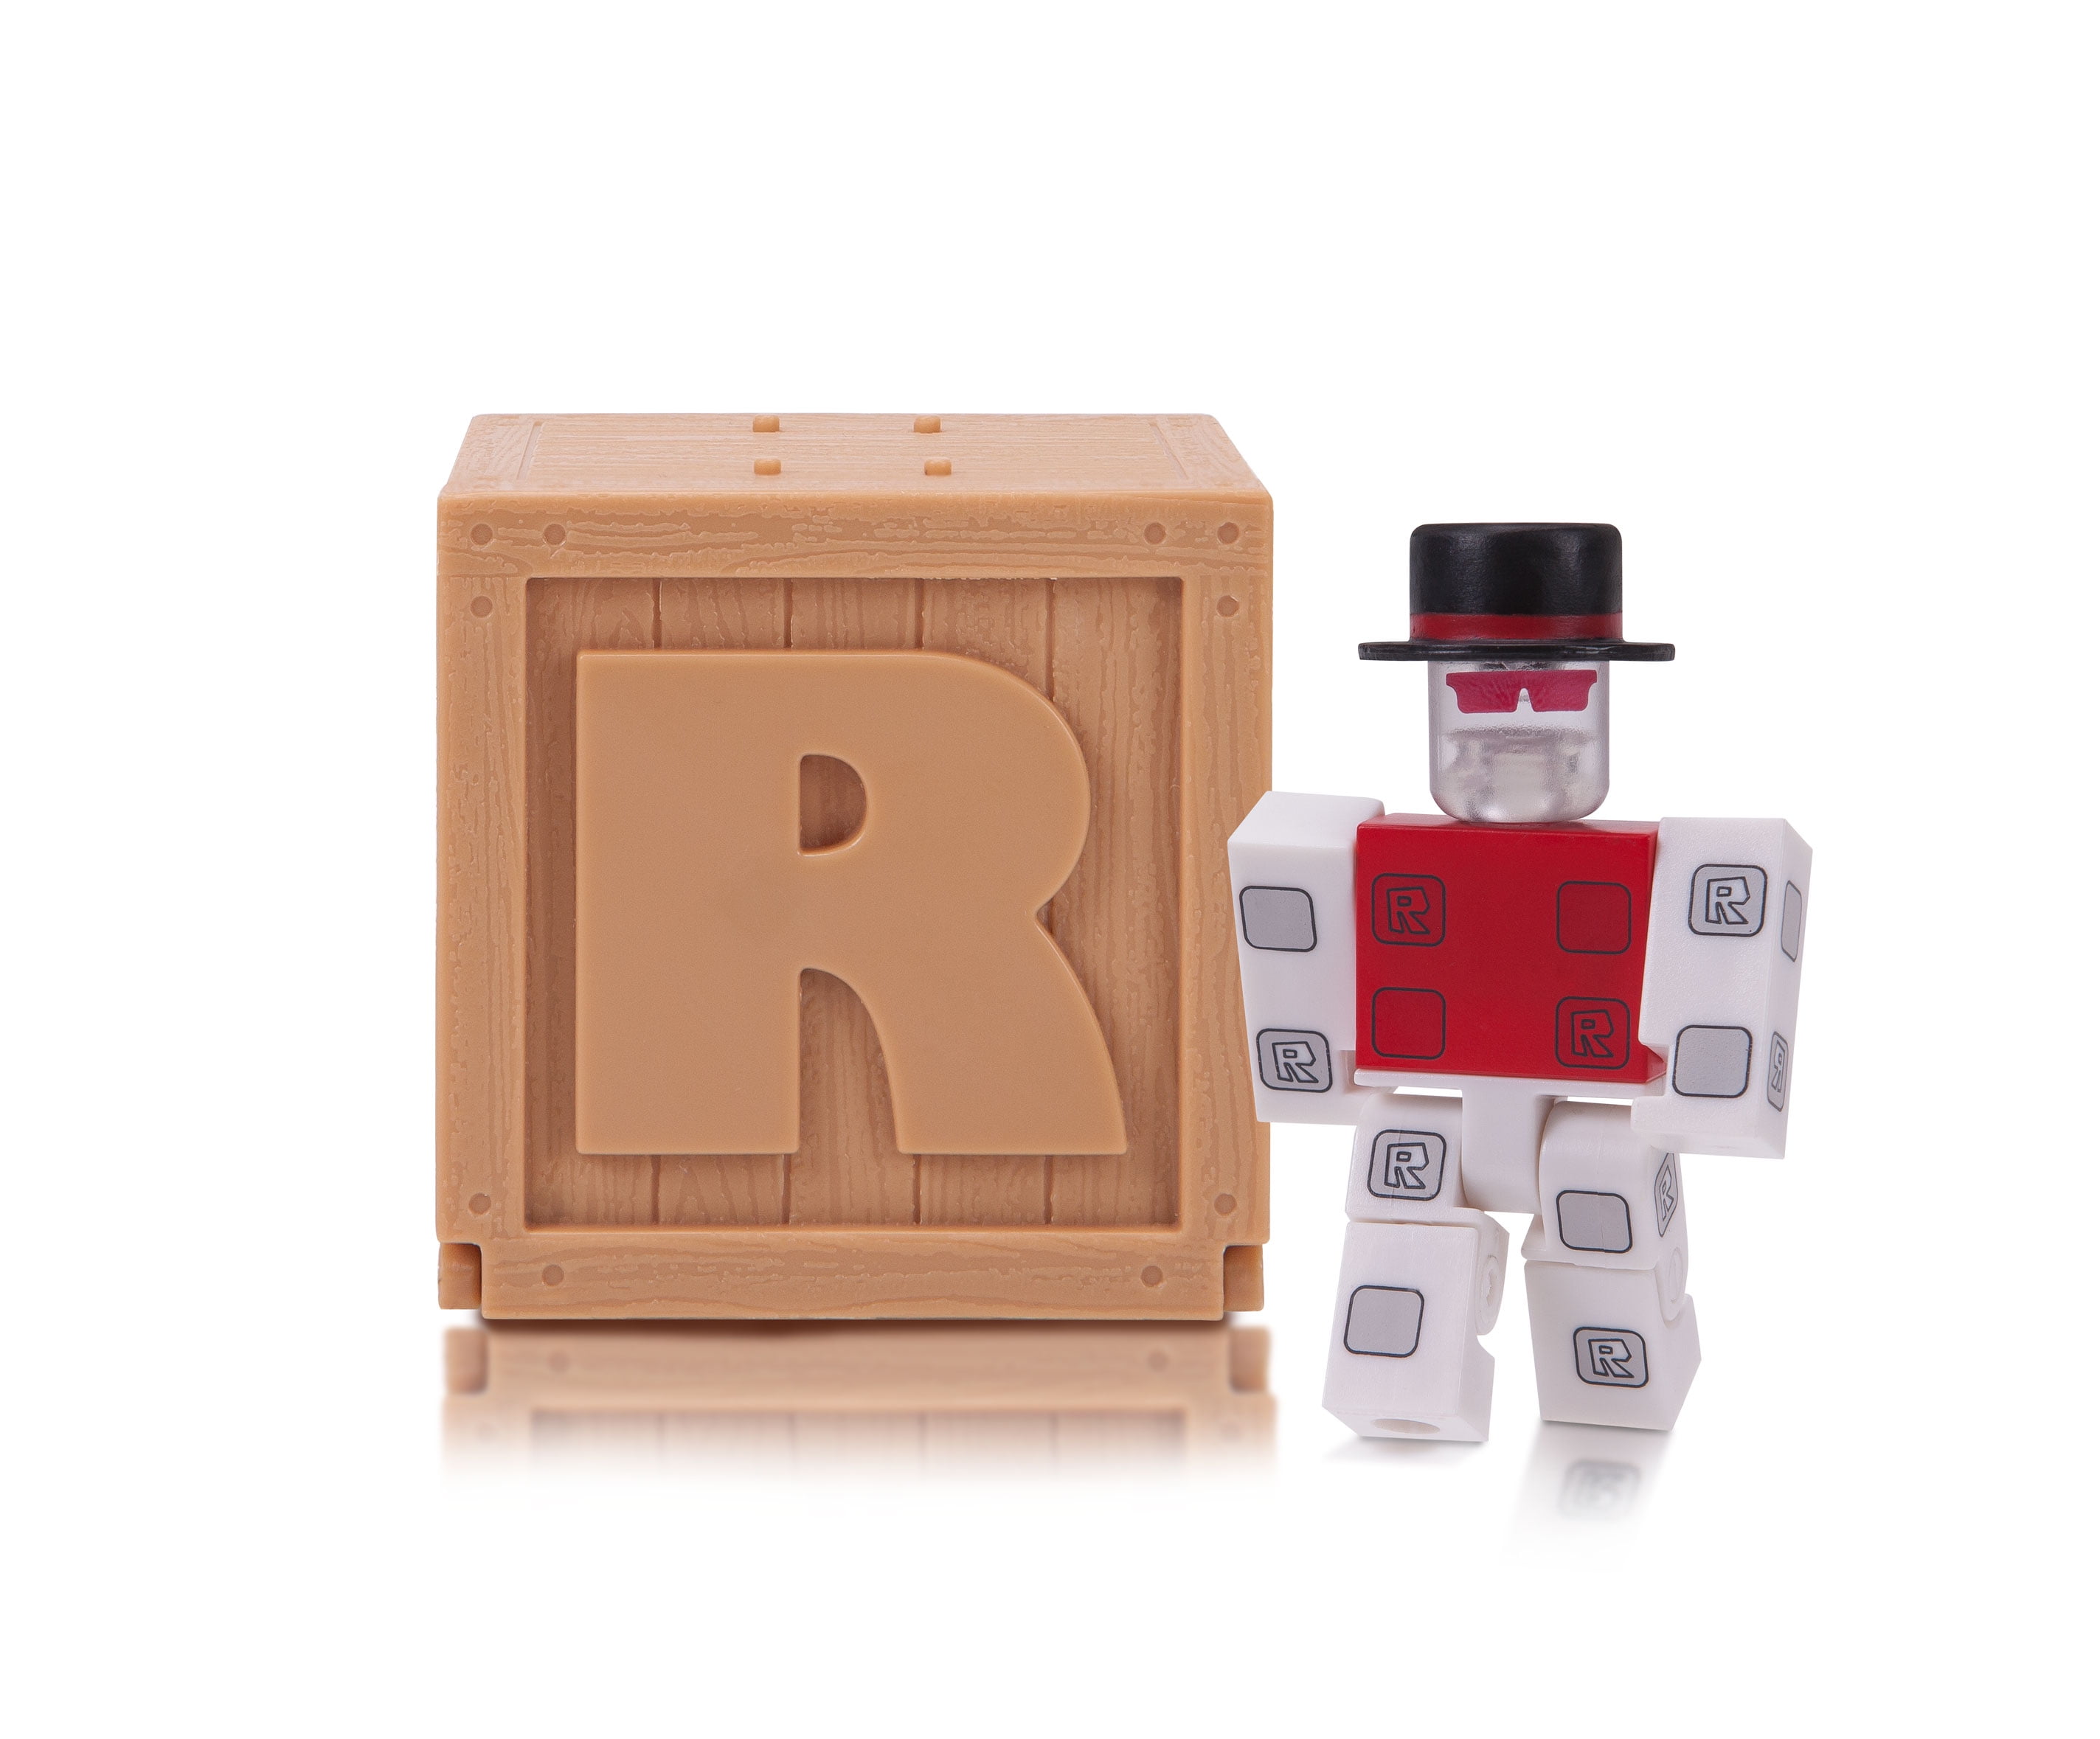 Roblox Action Collection Series 2 Mystery Figure Includes 1 Figure Exclusive Virtual Item Walmart Com Walmart Com - jazwares roblox series 2 roblox super fan action figure mystery box virtual item code 25 from walmart parentingcom shop